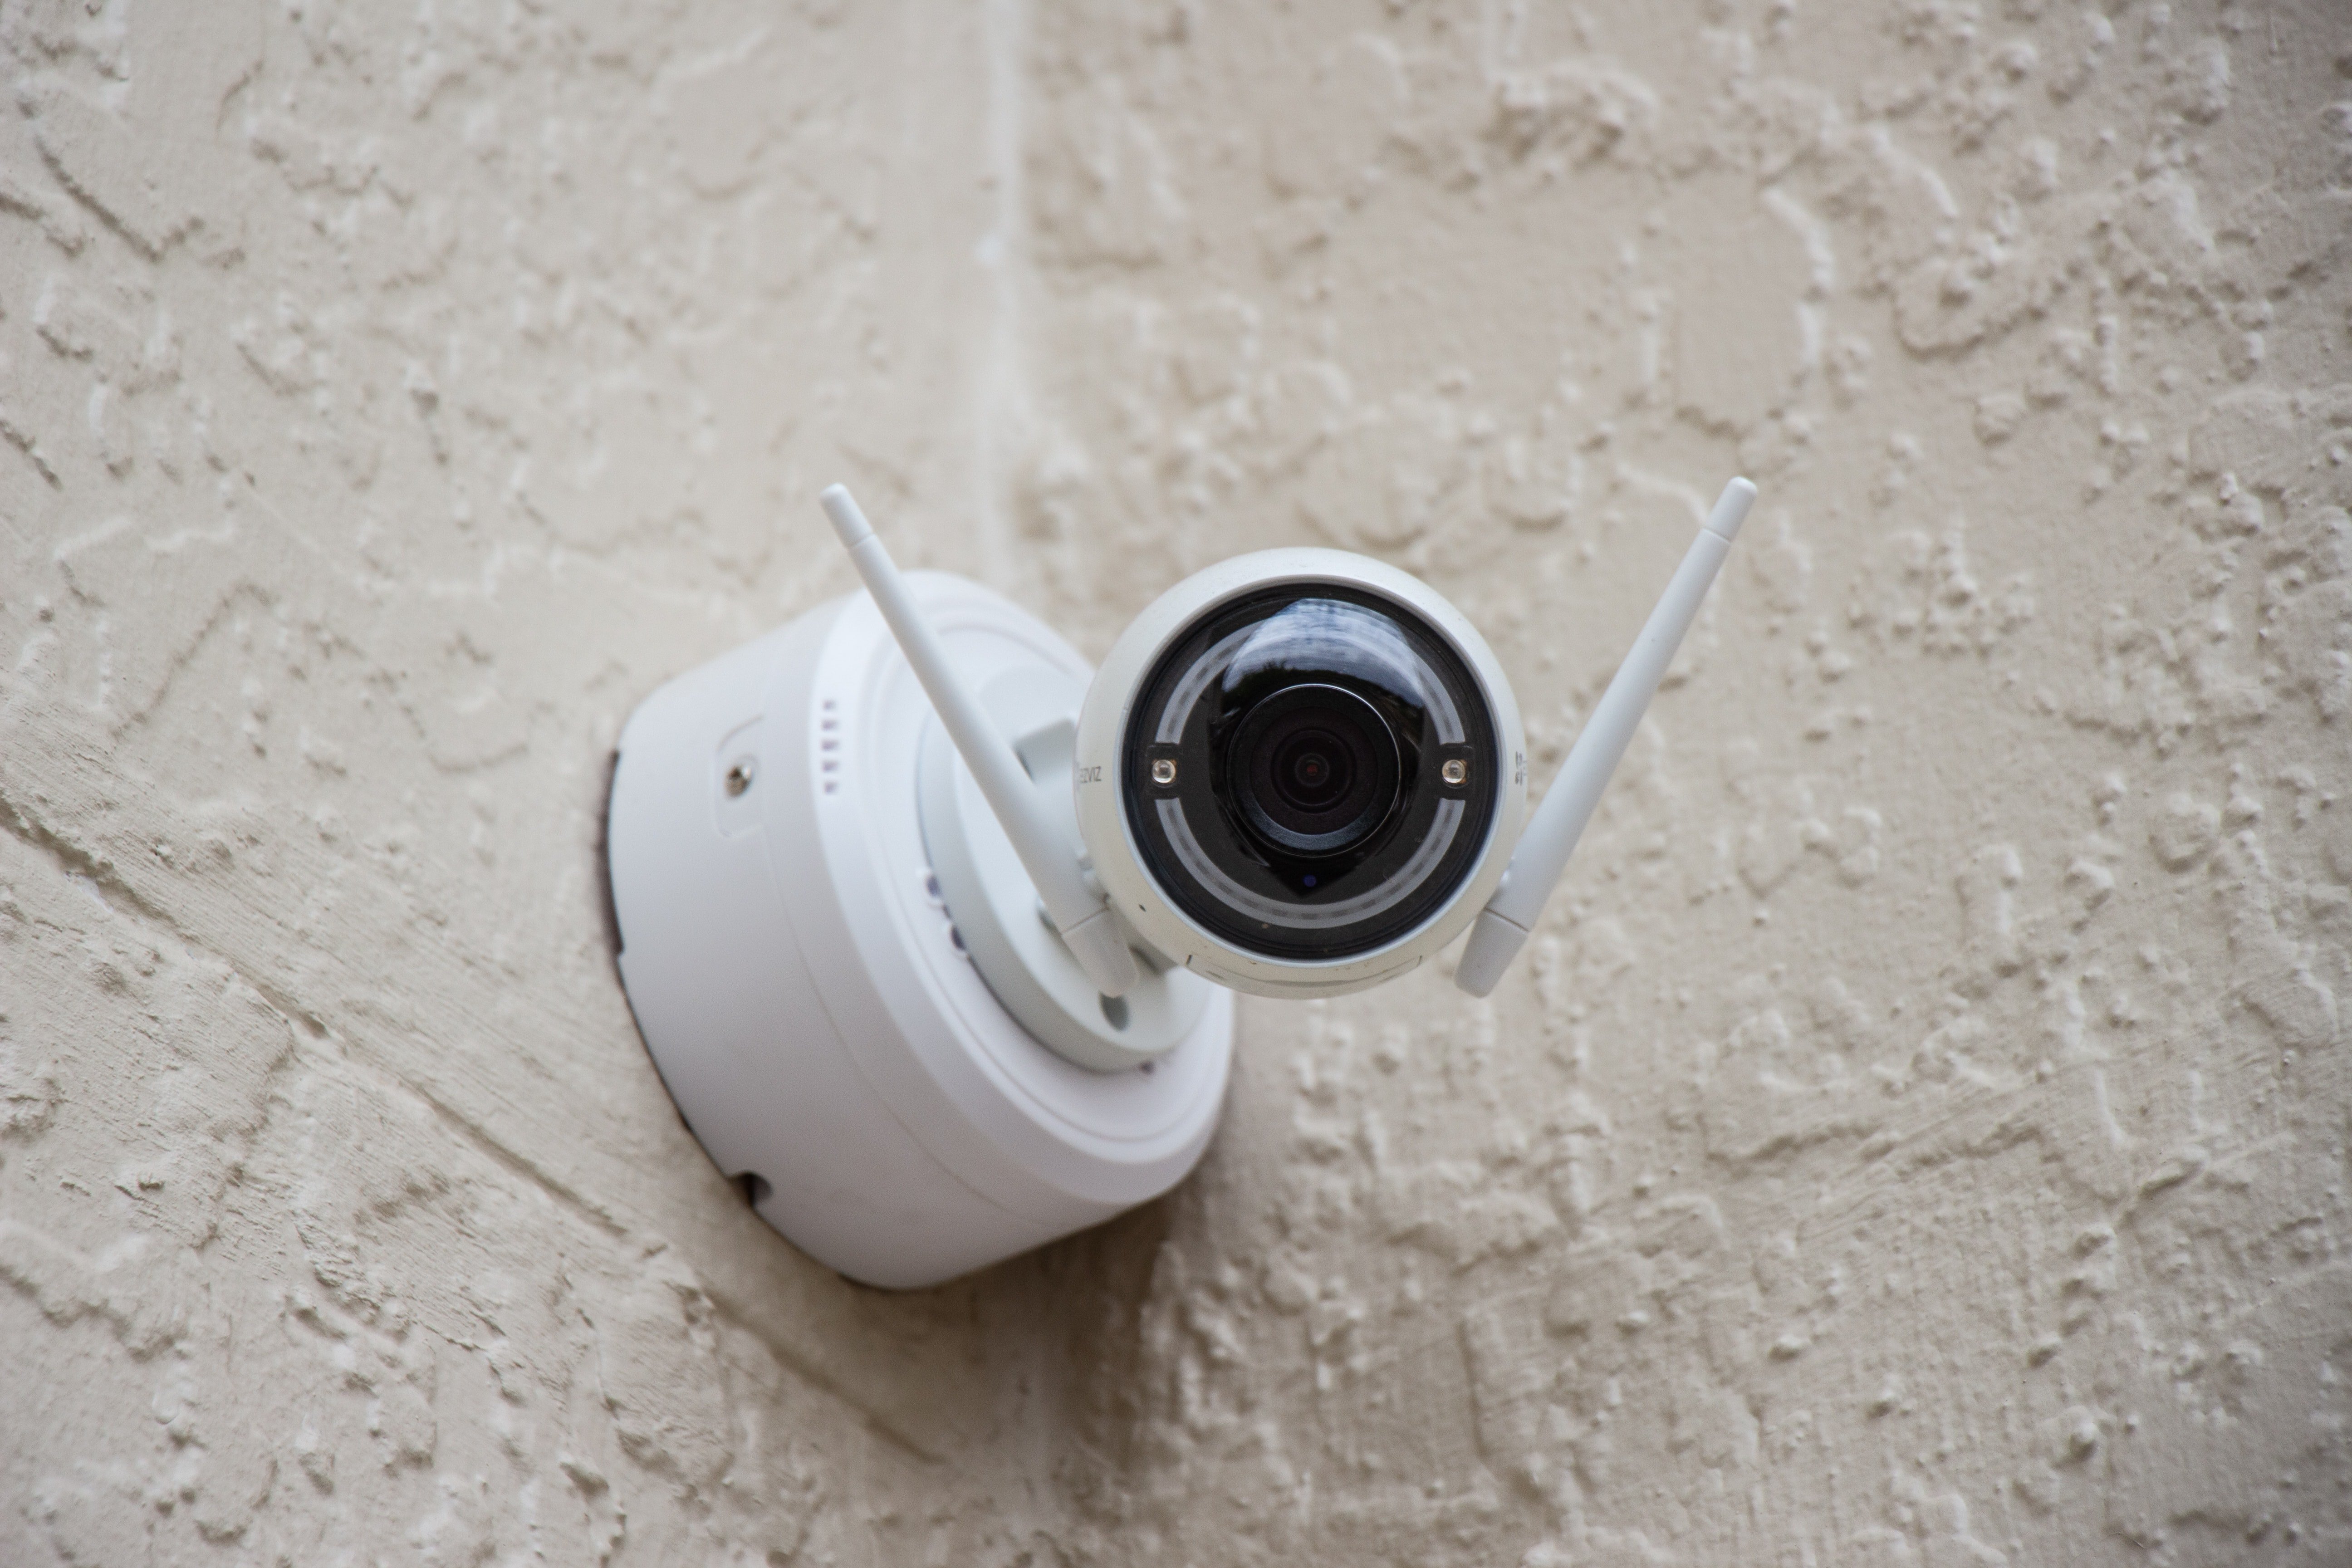 James installed security cameras to keep a check on Harry | Photo: Unsplash